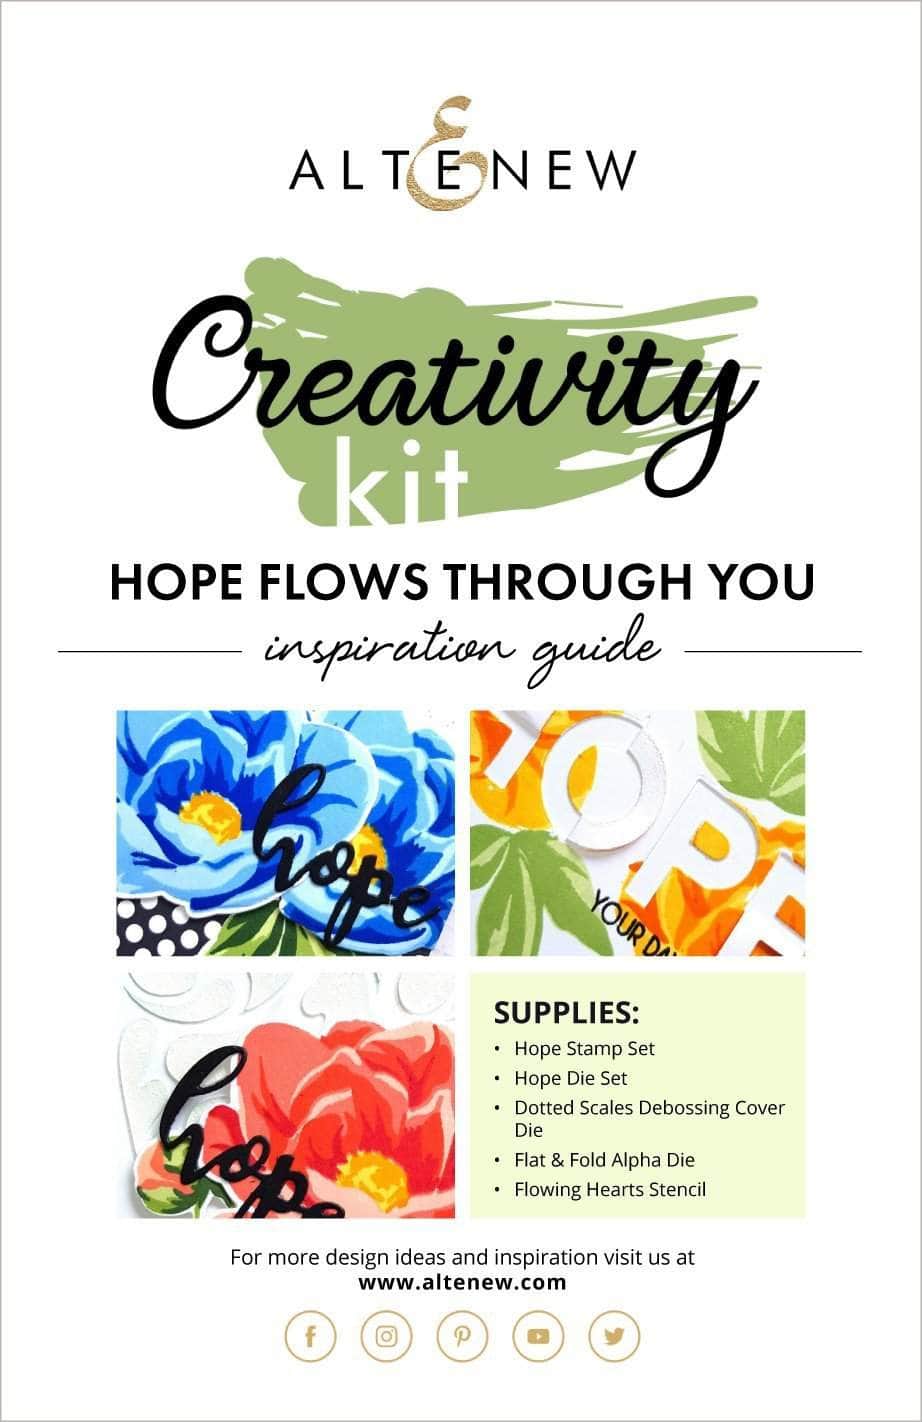 Printed Media Hope Flows Through You Creativity Kit Inspiration Guide